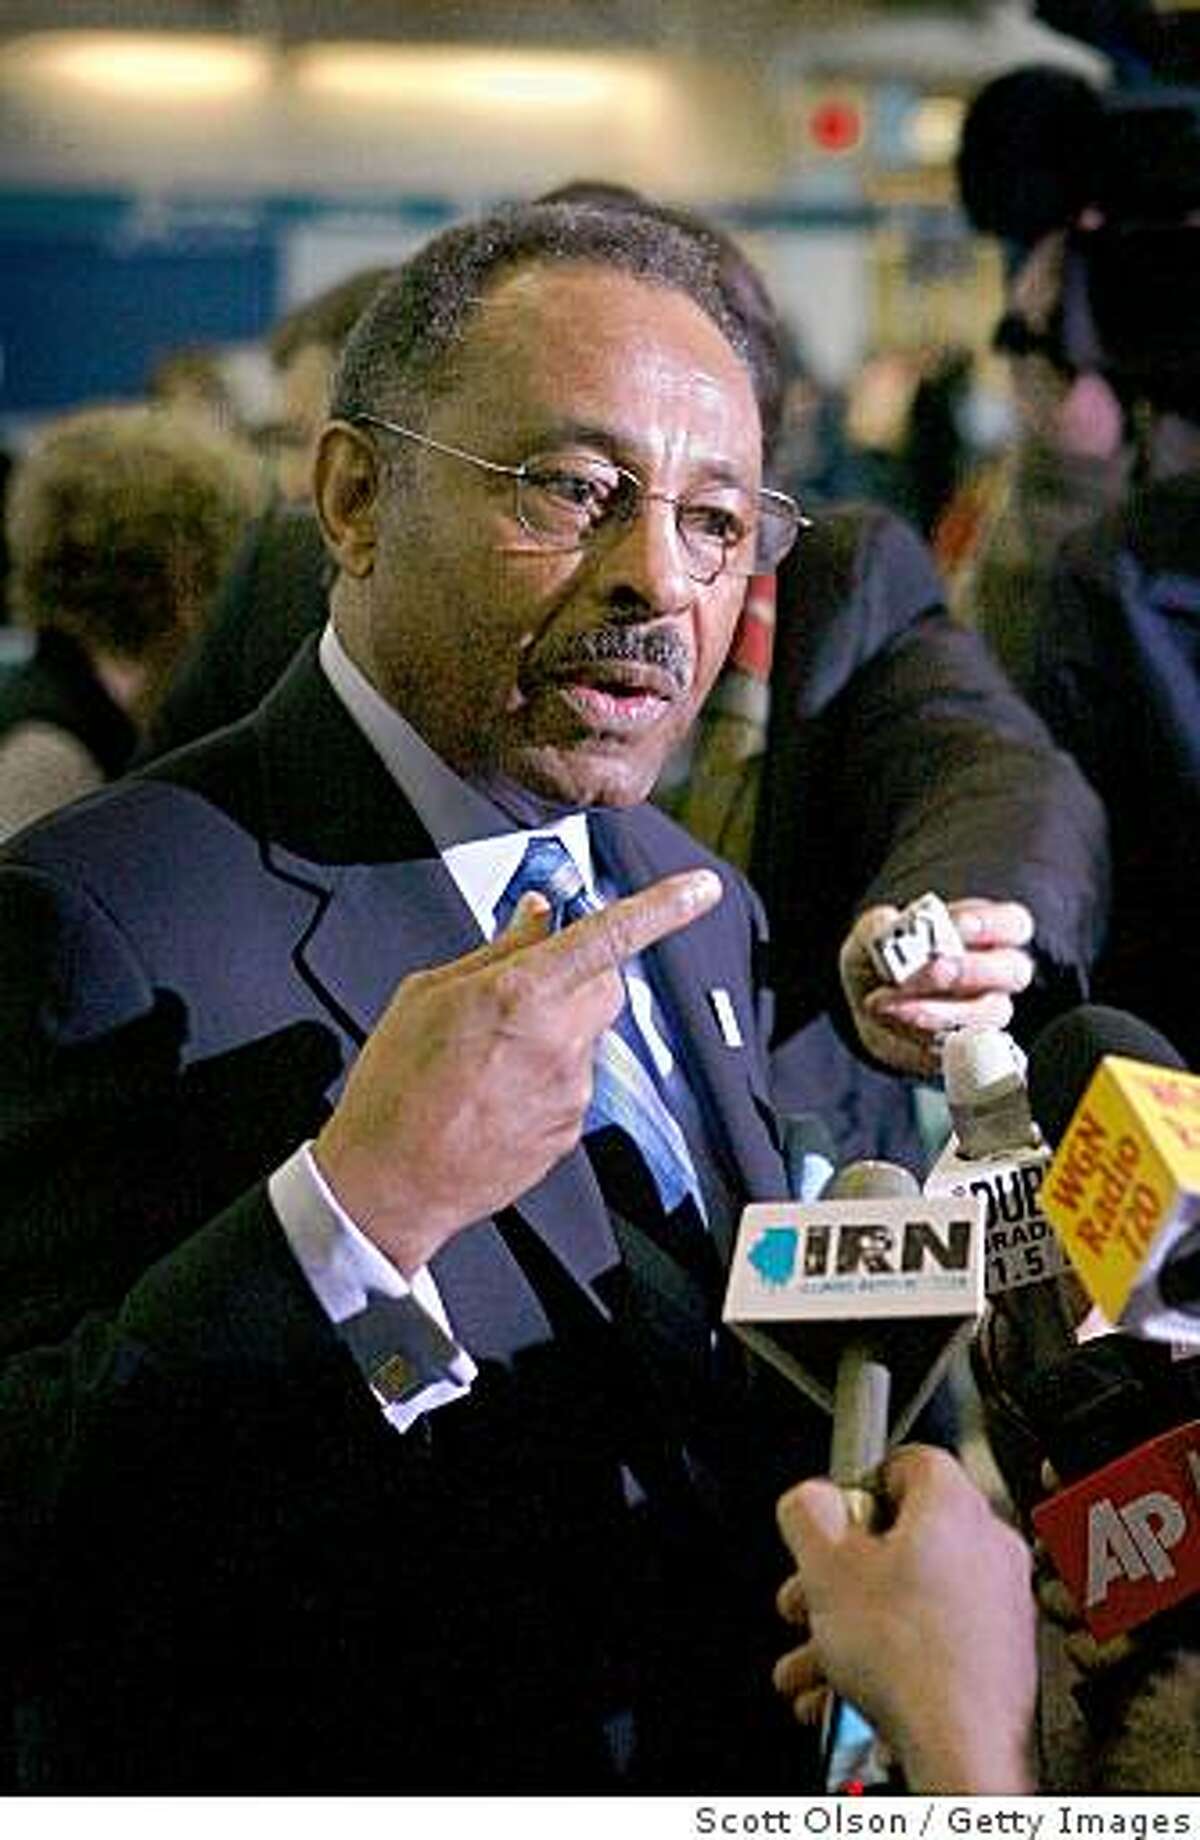 CHICAGO - JANUARY 05: Roland Burris, the former Illinois Attorney General chosen by Illinois Governor Rod Blagojevich to fill the U. S. Senate seat vacated by President-Elect Barack Obama, speaks to the media as he prepares to catch a flight to Washington, D.C. at Midway Airport January 5, 2009 in Chicago, Illinois. Opponents say they will fight Burris' appointment because Blagojevich was recently accused by federal authorities of offering to sell the vacancy to the highest bidder. (Photo by Scott Olson/Getty Images)